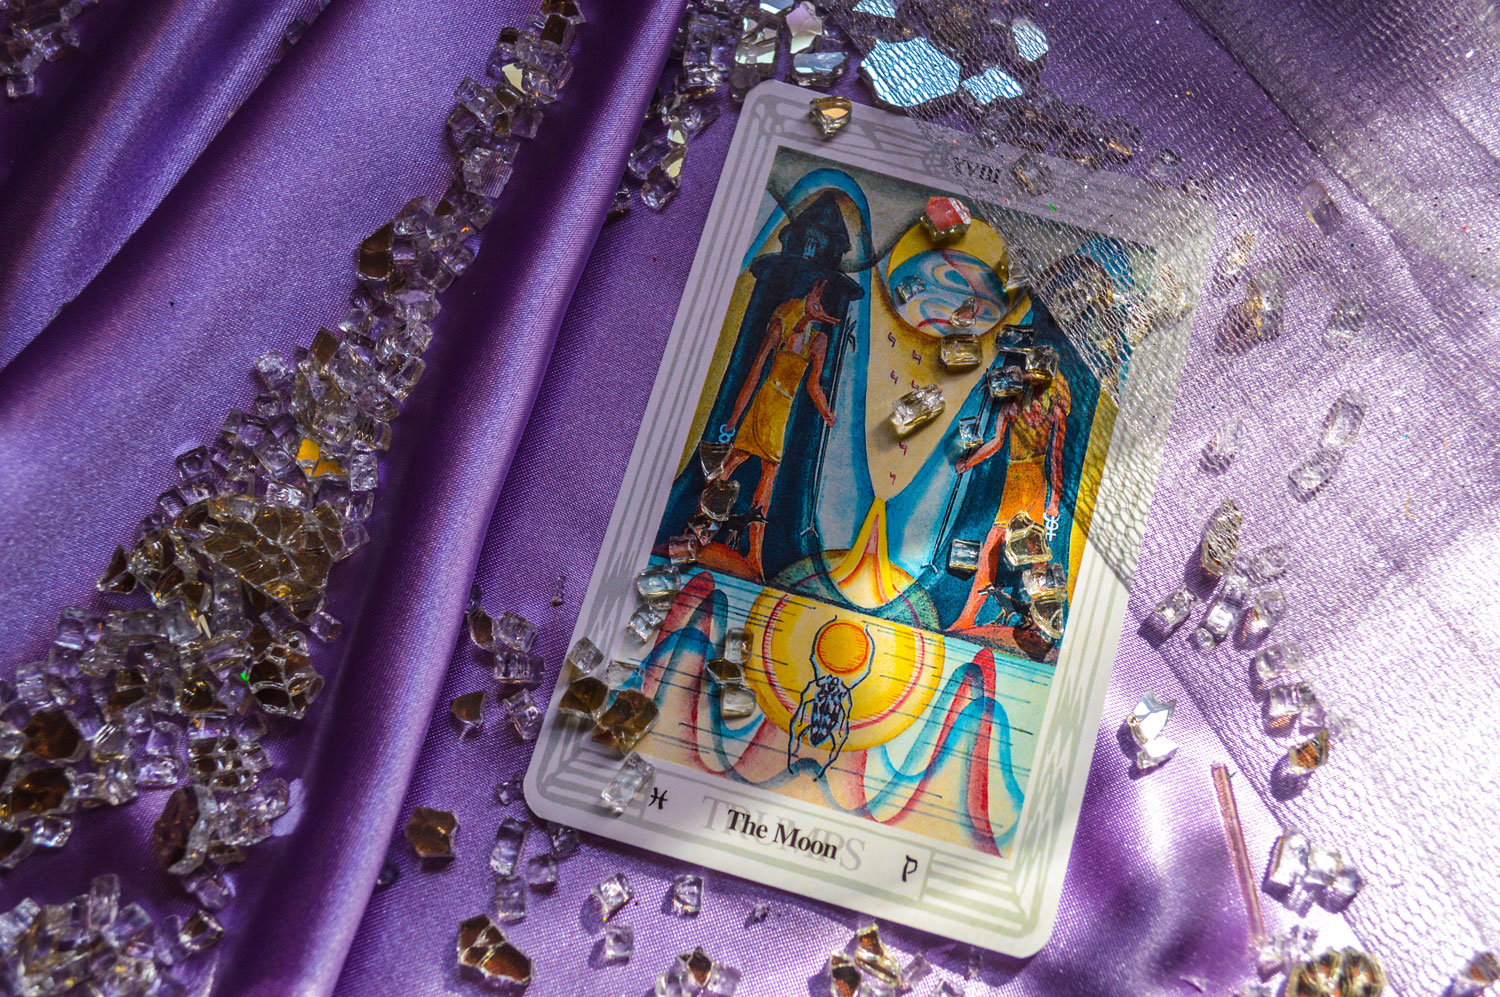 Pisces Power Card: The Moon - Use your intuition to heal repressed emotion, inner confusion, and release fear. Rely on your own instincts. 